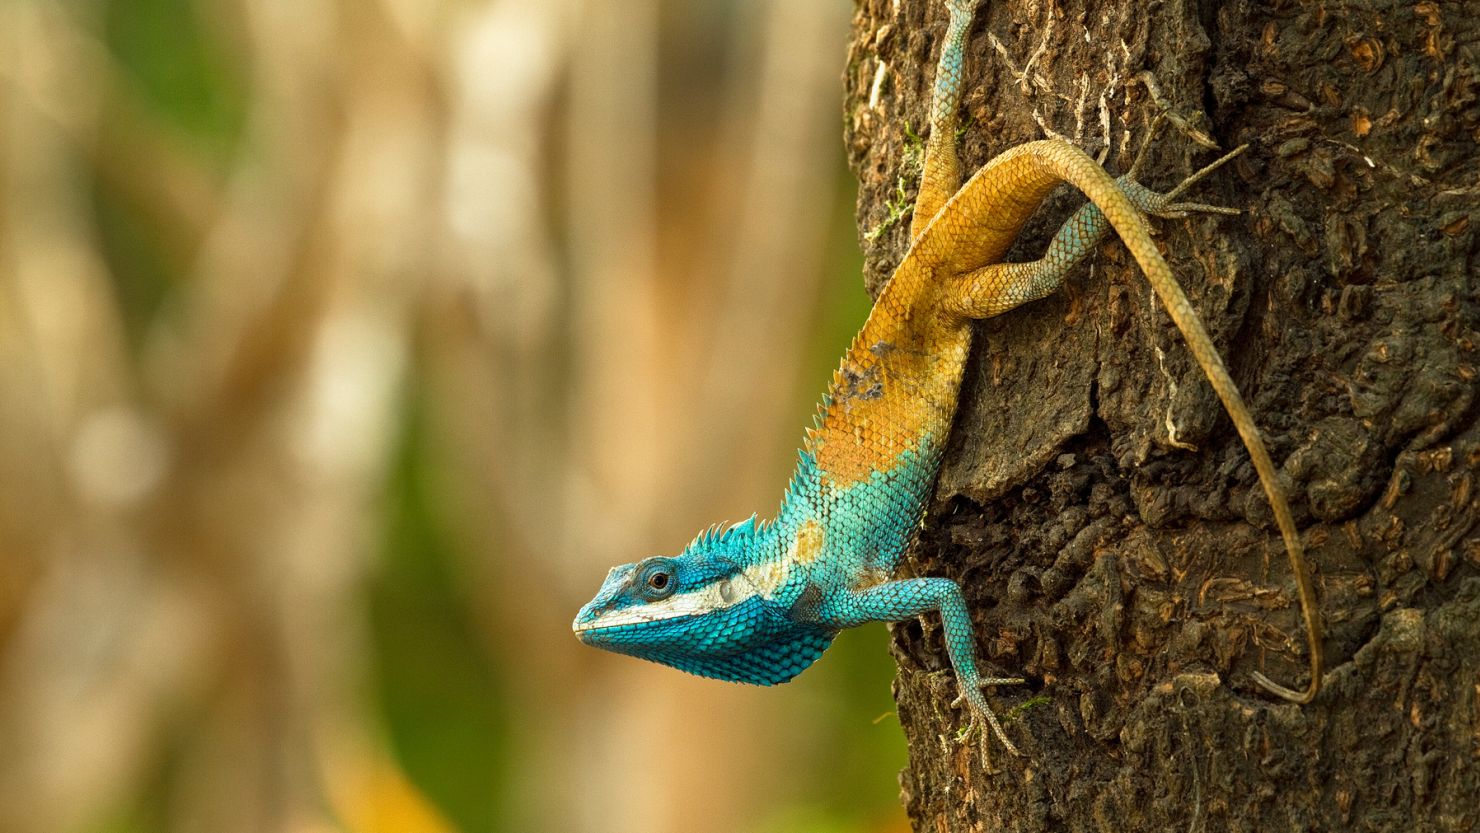 The Cambodian blue-crested agama is among the 380 new species listed in the World Wildlife Fund's latest update on the Mekong region. It changes color as a defense mechanism.